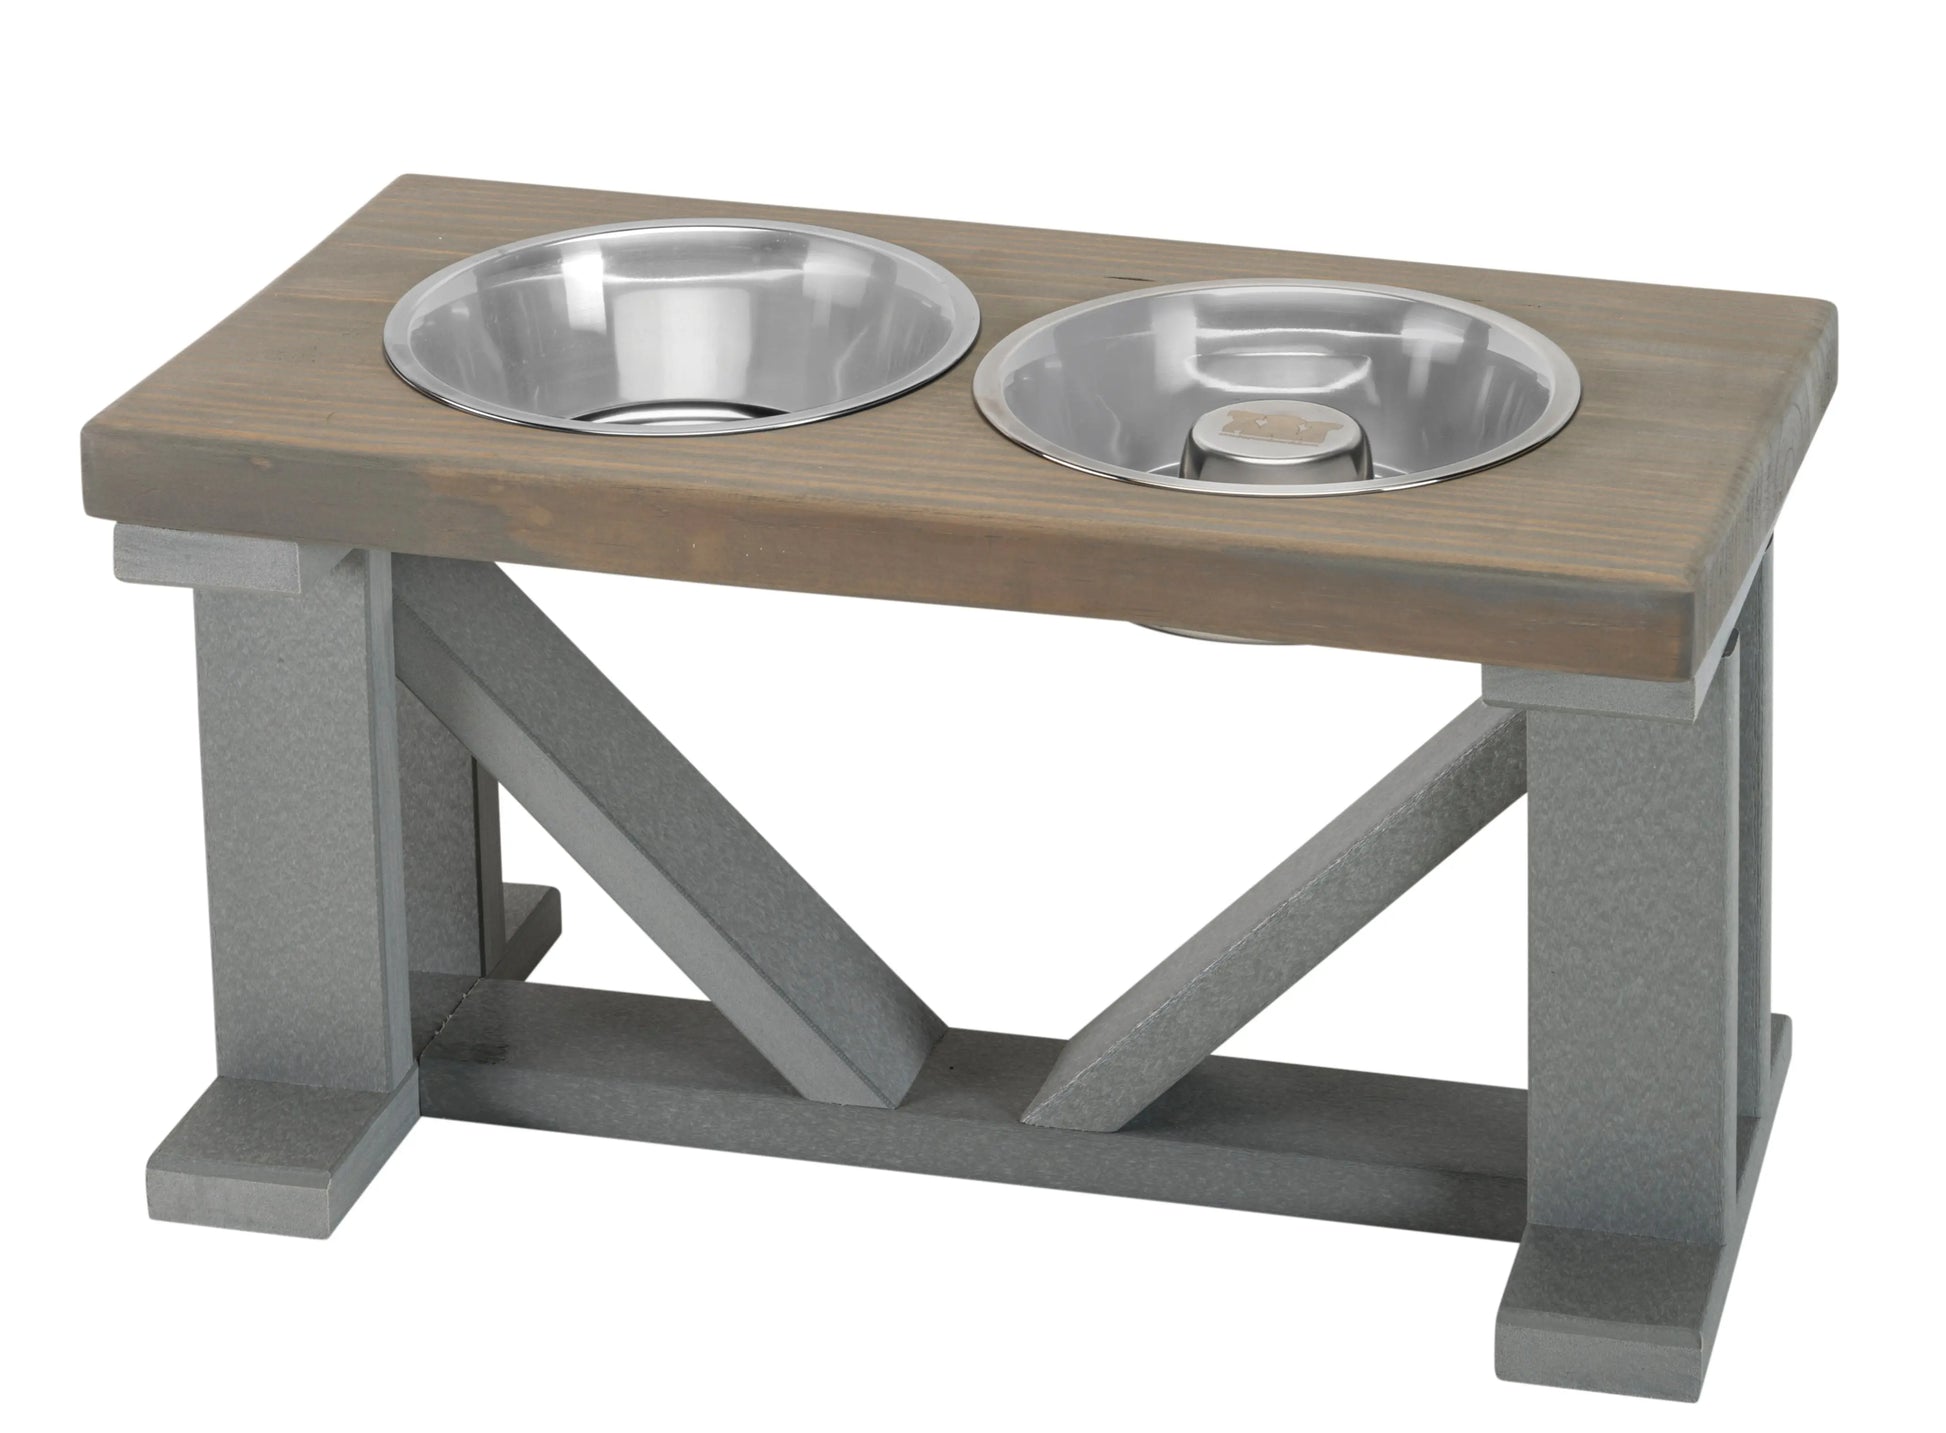 Pet Elevated Dog Bowls, 2-in-1 Raised Slow Feeder Dog Bowls Stand